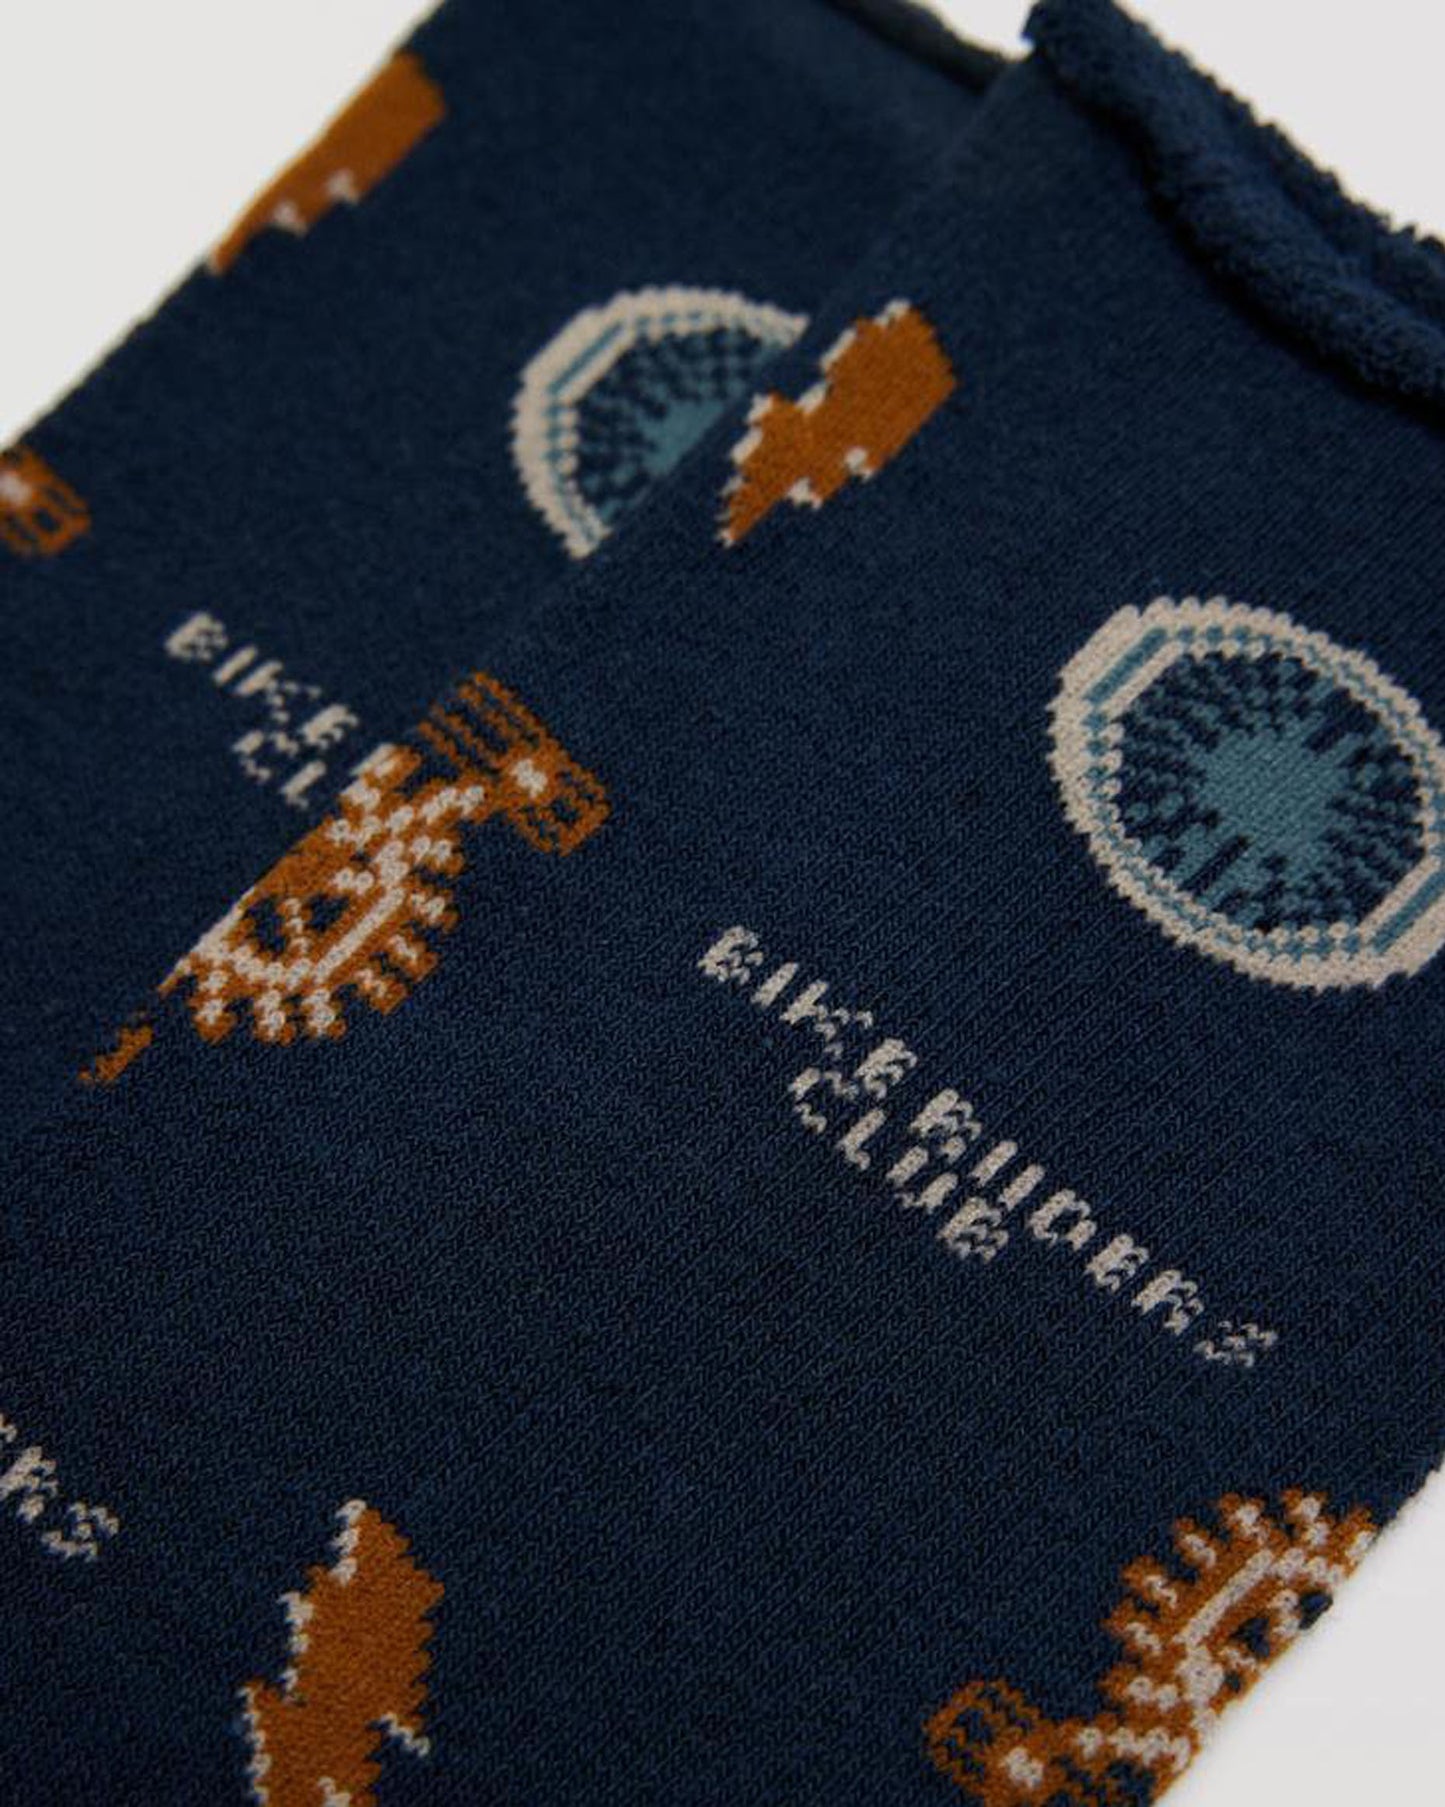 Thick and warm terry lined navy blue cotton crew length soft no cuff ankle socks with an all over pattern of bicycle parts (wheels and pedals), lightning bolts and the text "bike riders club".